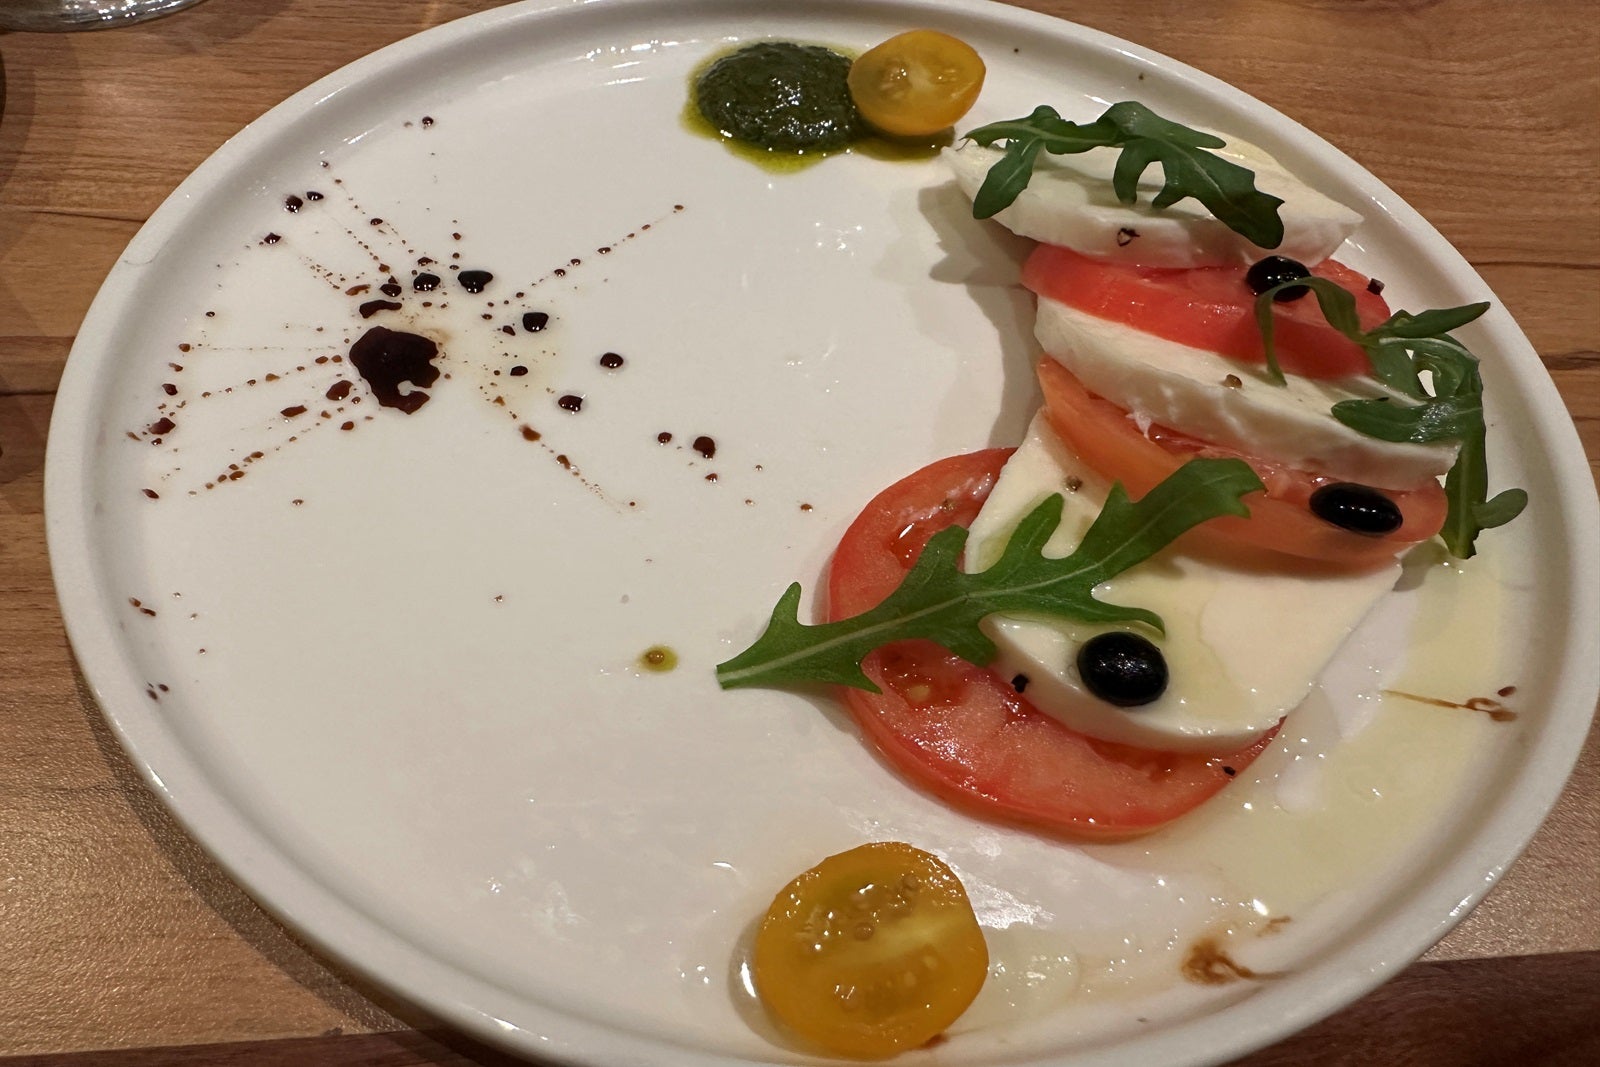 A plate with decoratively arranged caprese salad